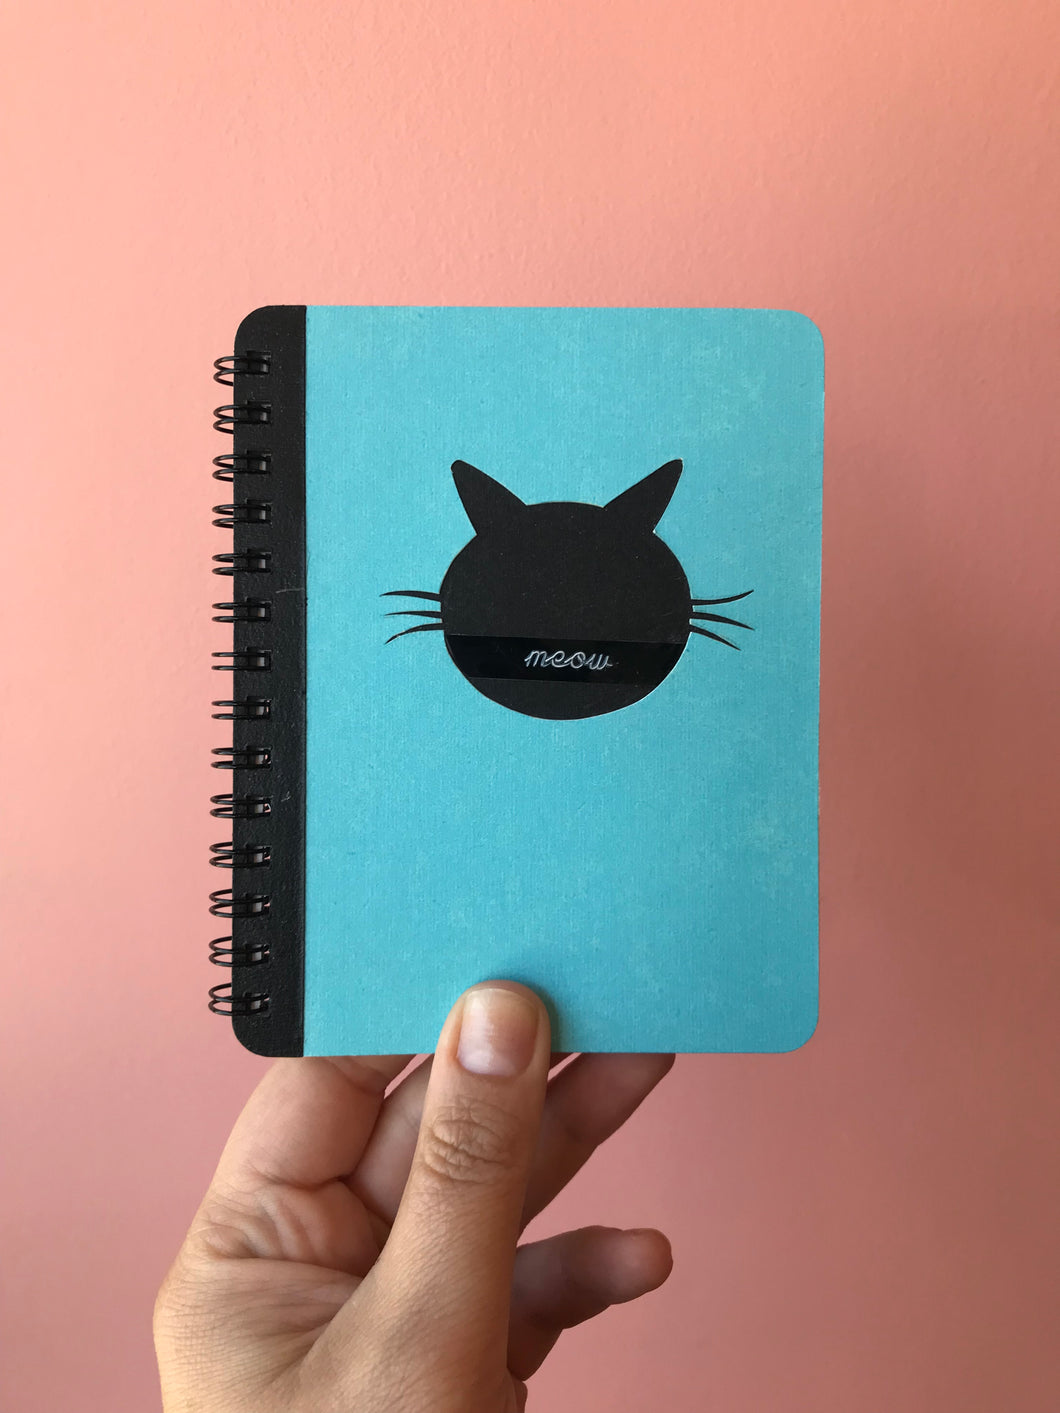 Meow - handmade rescued notebook